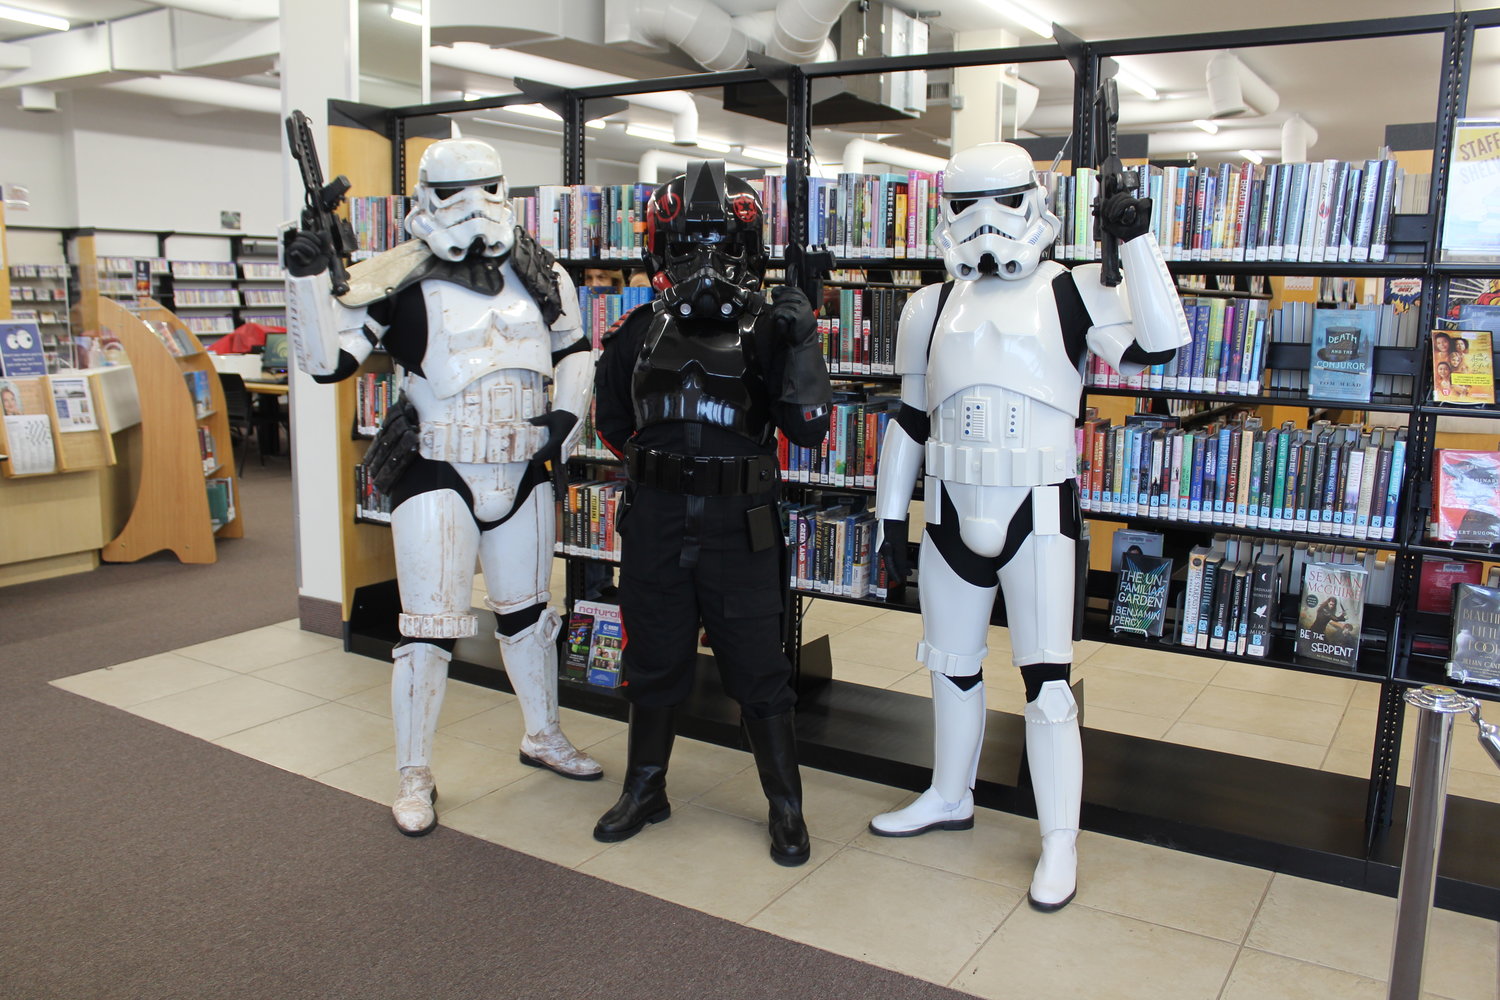 Stormtroopers Chris Feehan, Bret Chiarello and Kristina Murtha guard the Oceanside library’s books.